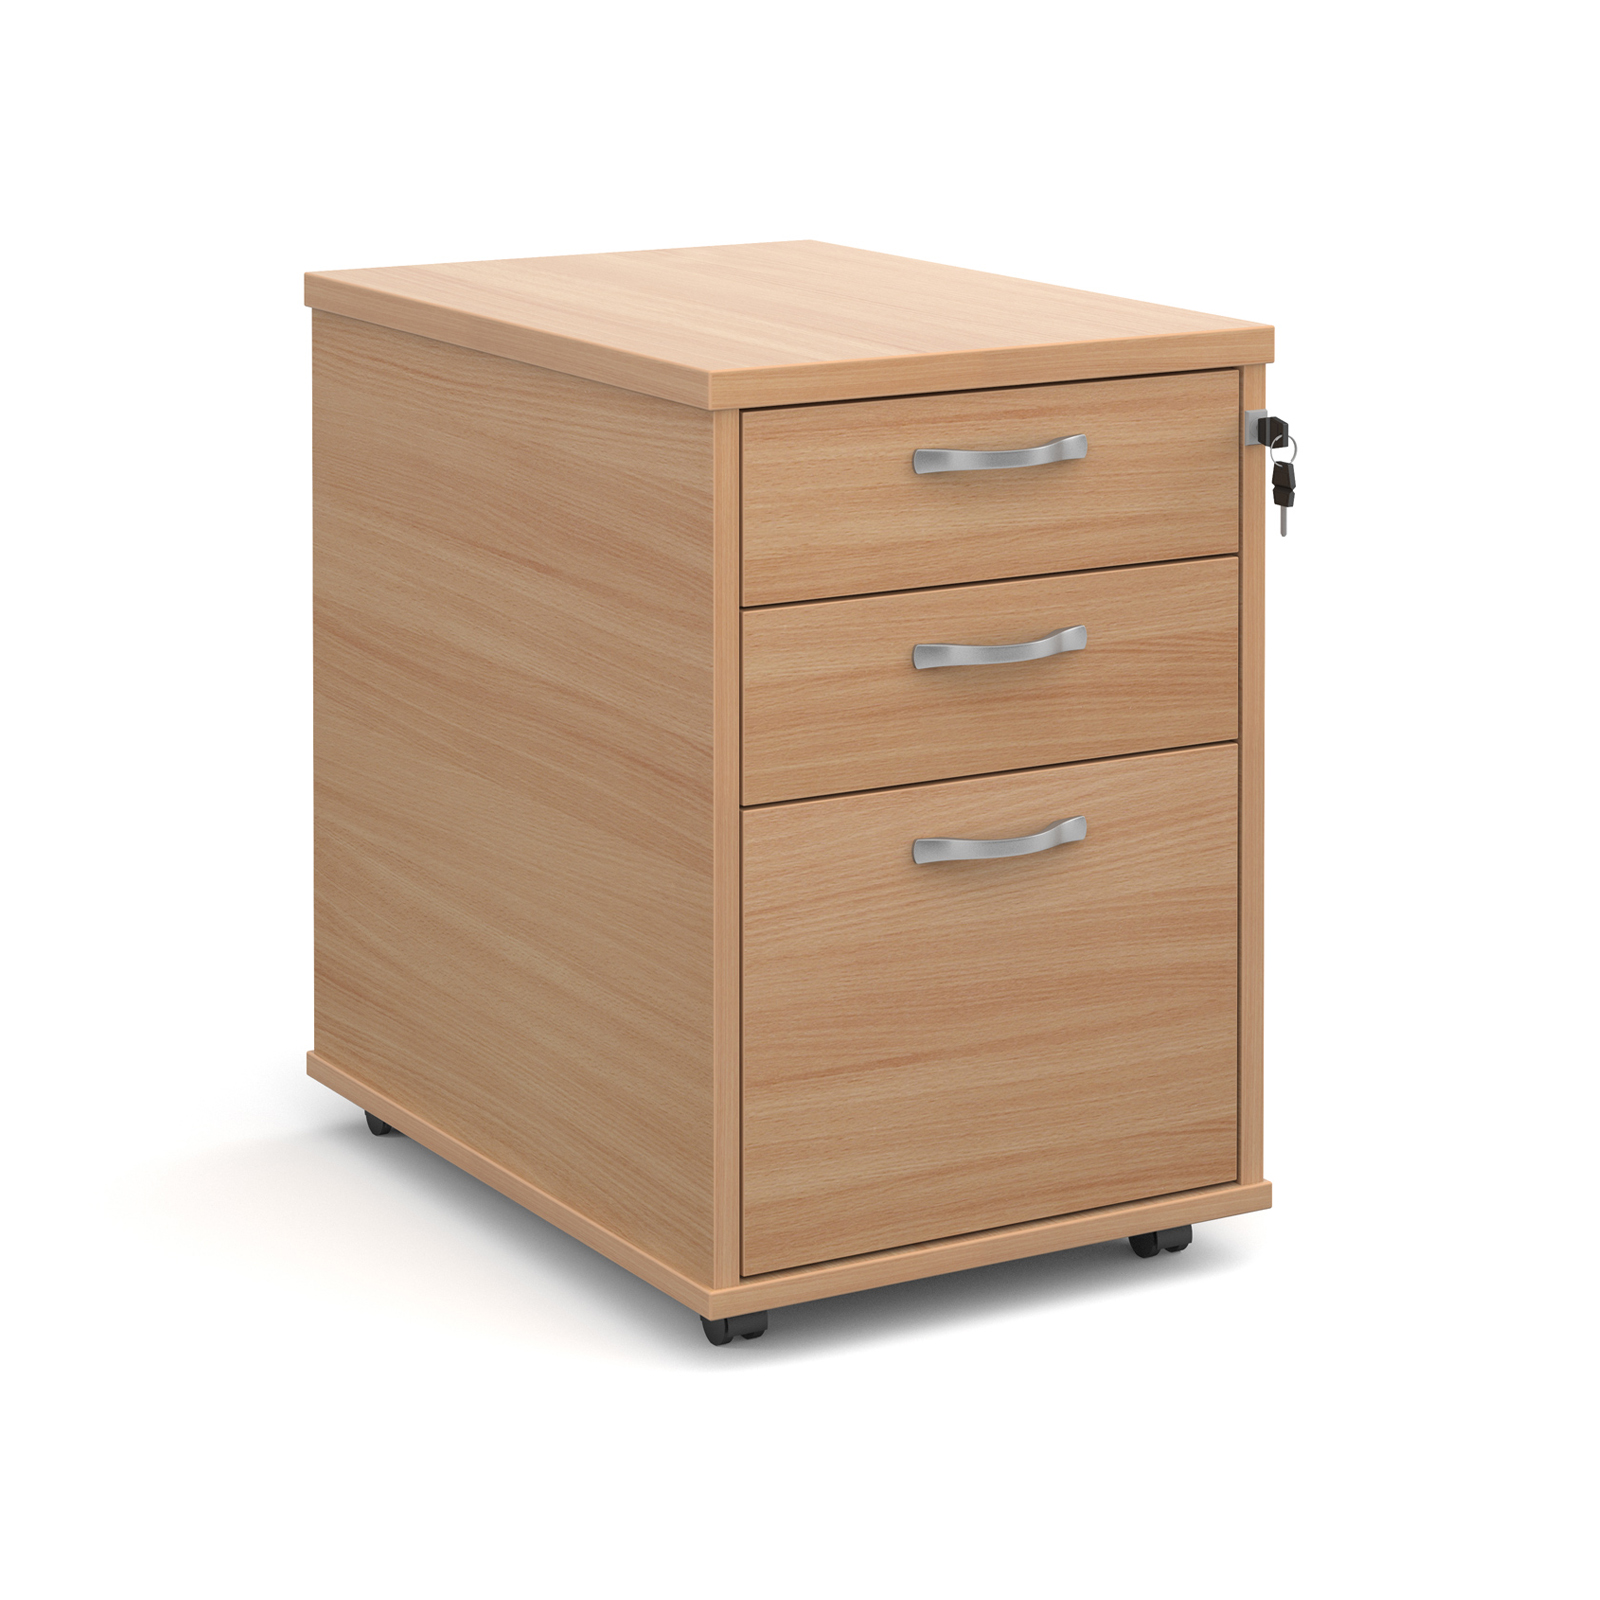 3 Drawer Tall mobile 3 drawer pedestal with silver handles 600mm deep - beech